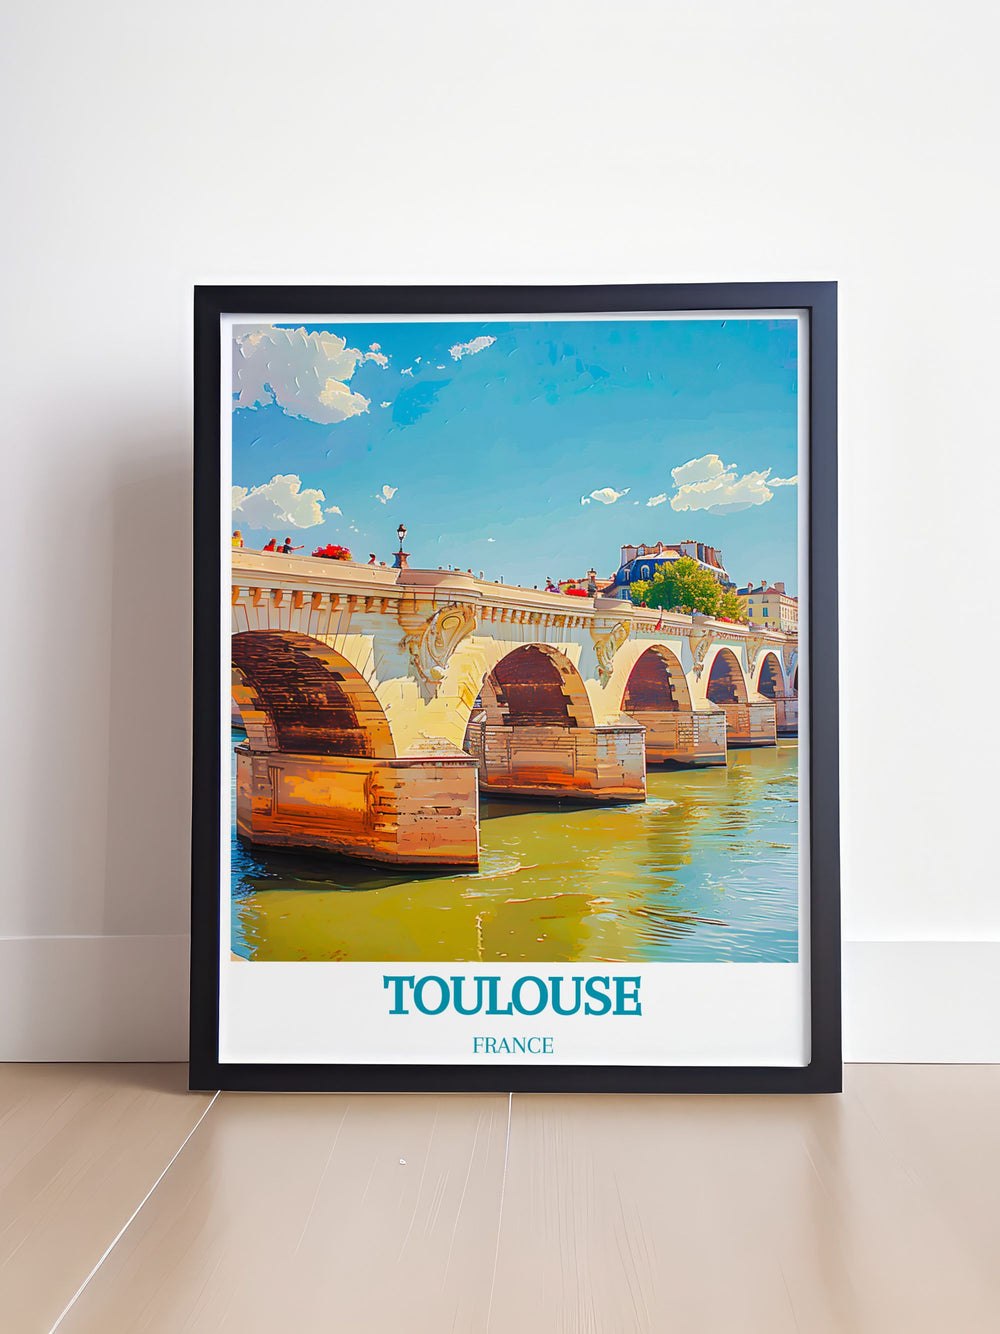 Experience the vibrant urban landscape of Toulouse with this detailed art print, featuring the iconic Pont Neuf and its surrounding cityscape.